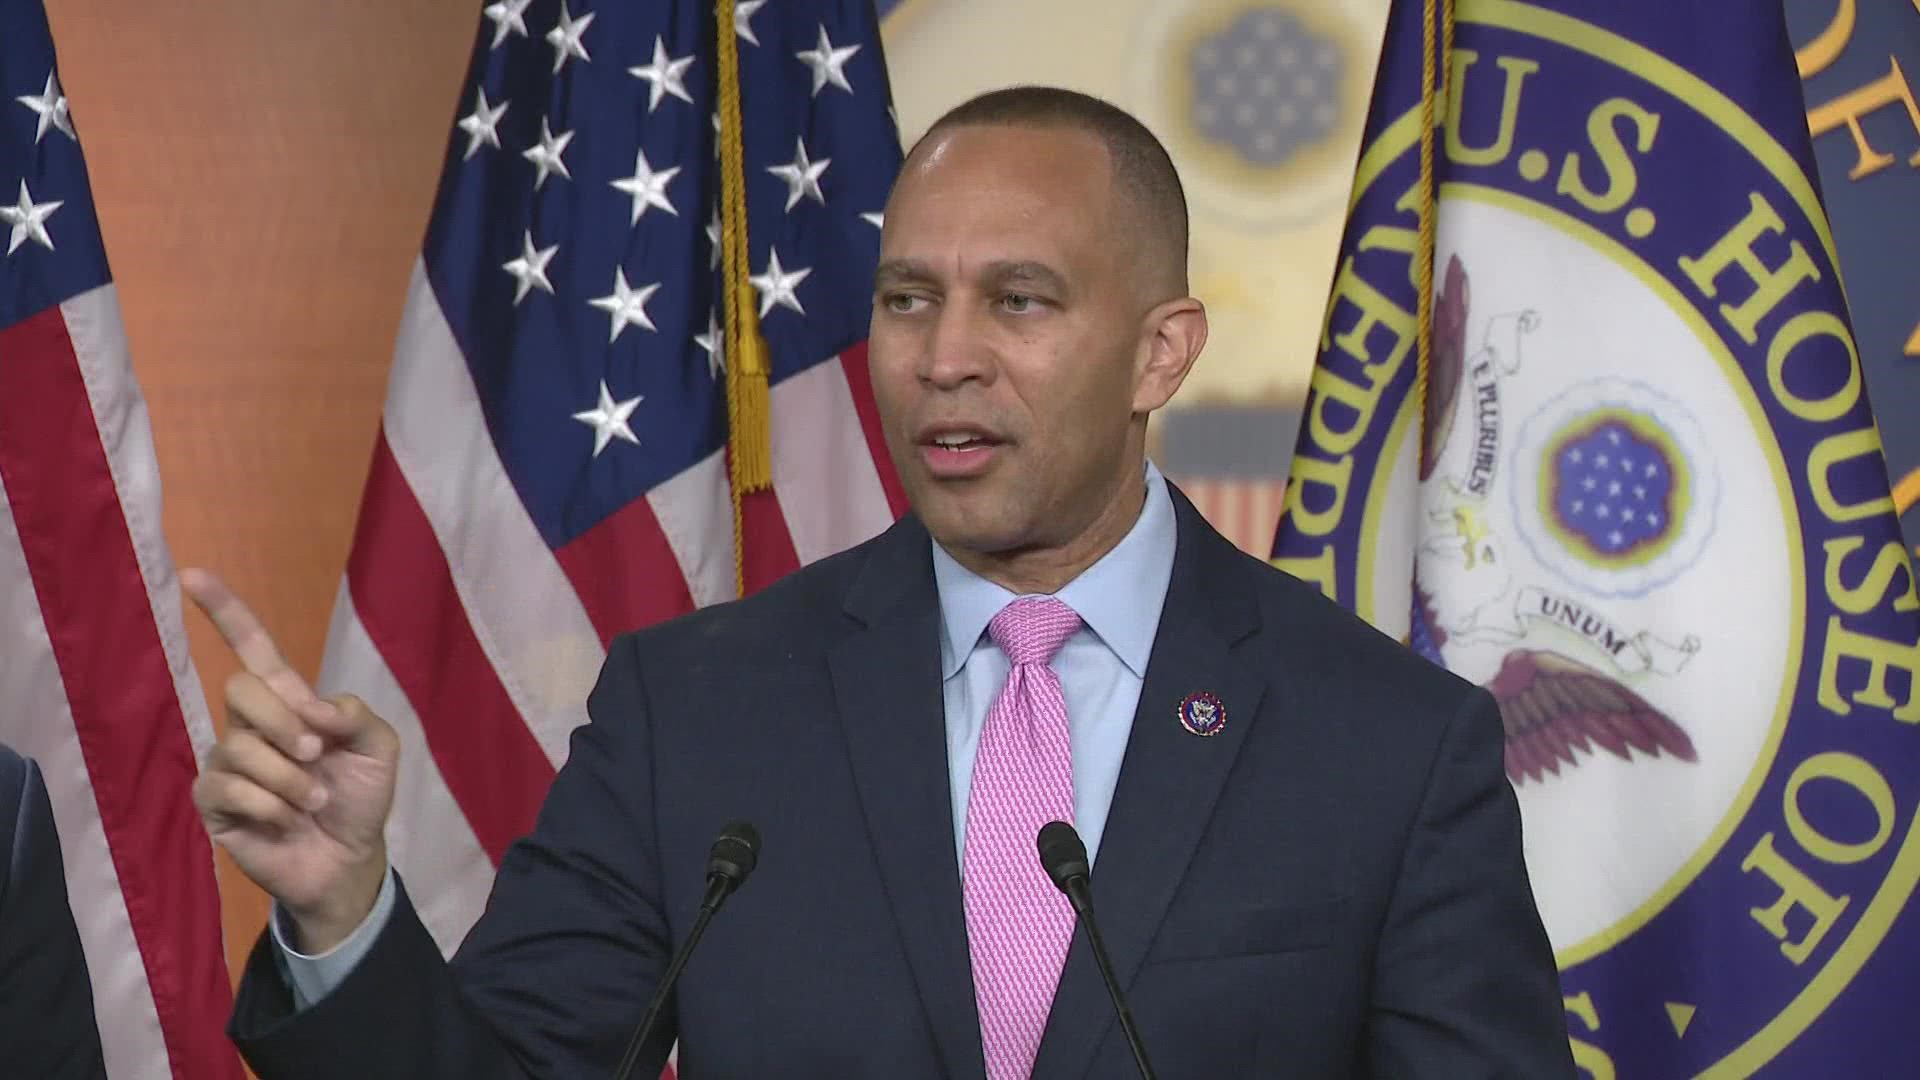 House Democrats make history by electing Hakeem Jeffries as their new leader, the first Black leader of either party in Congress.